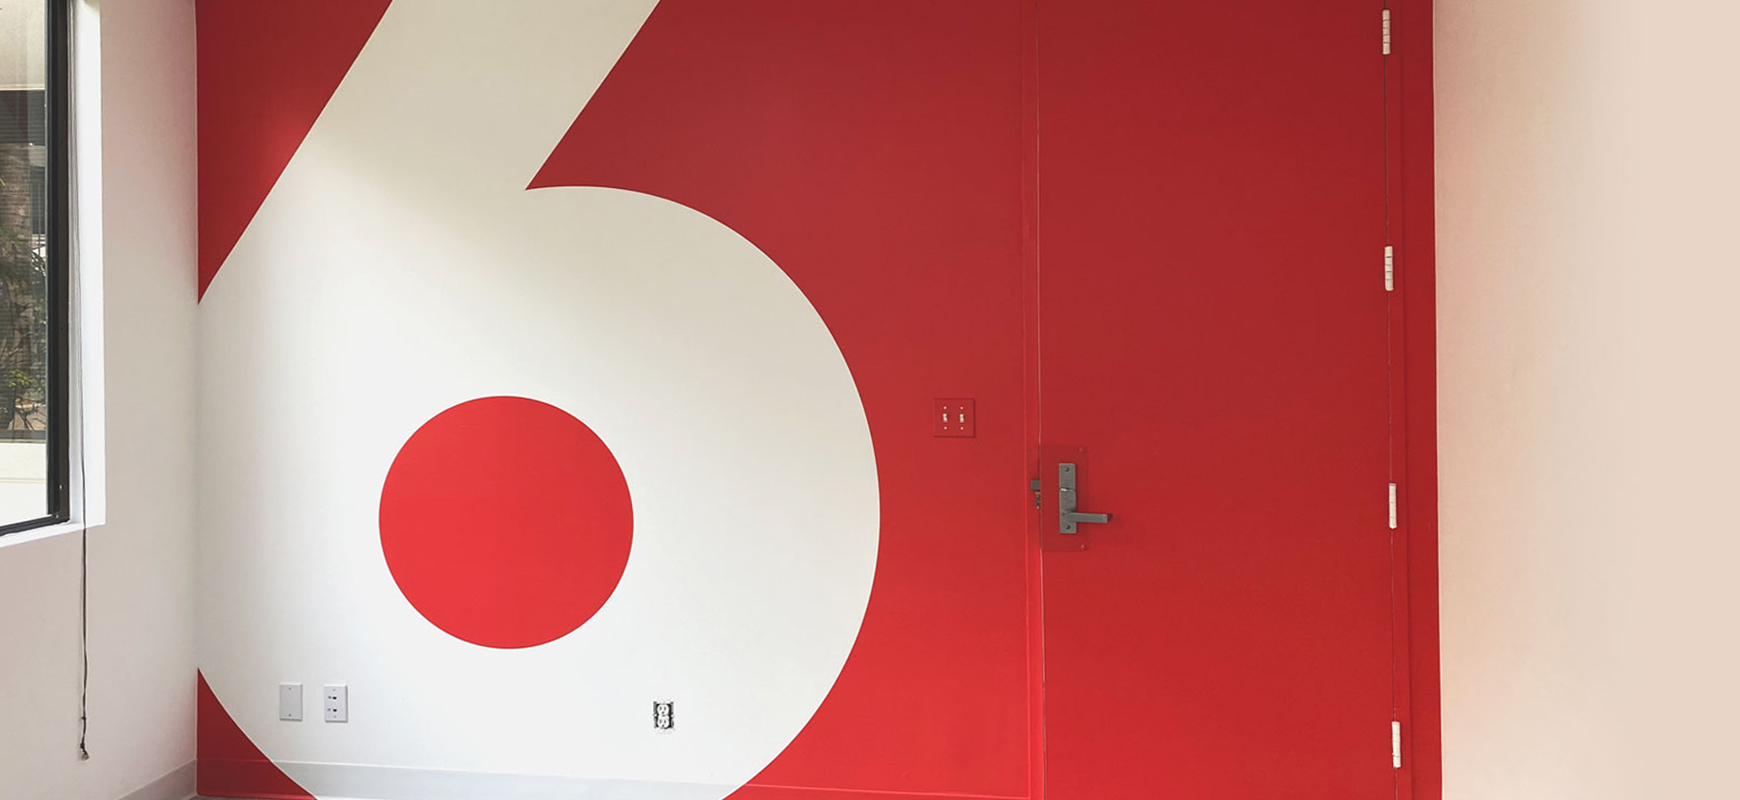 red and white vinyl wall decal with the number 6 made of opaque vinyl for interior design